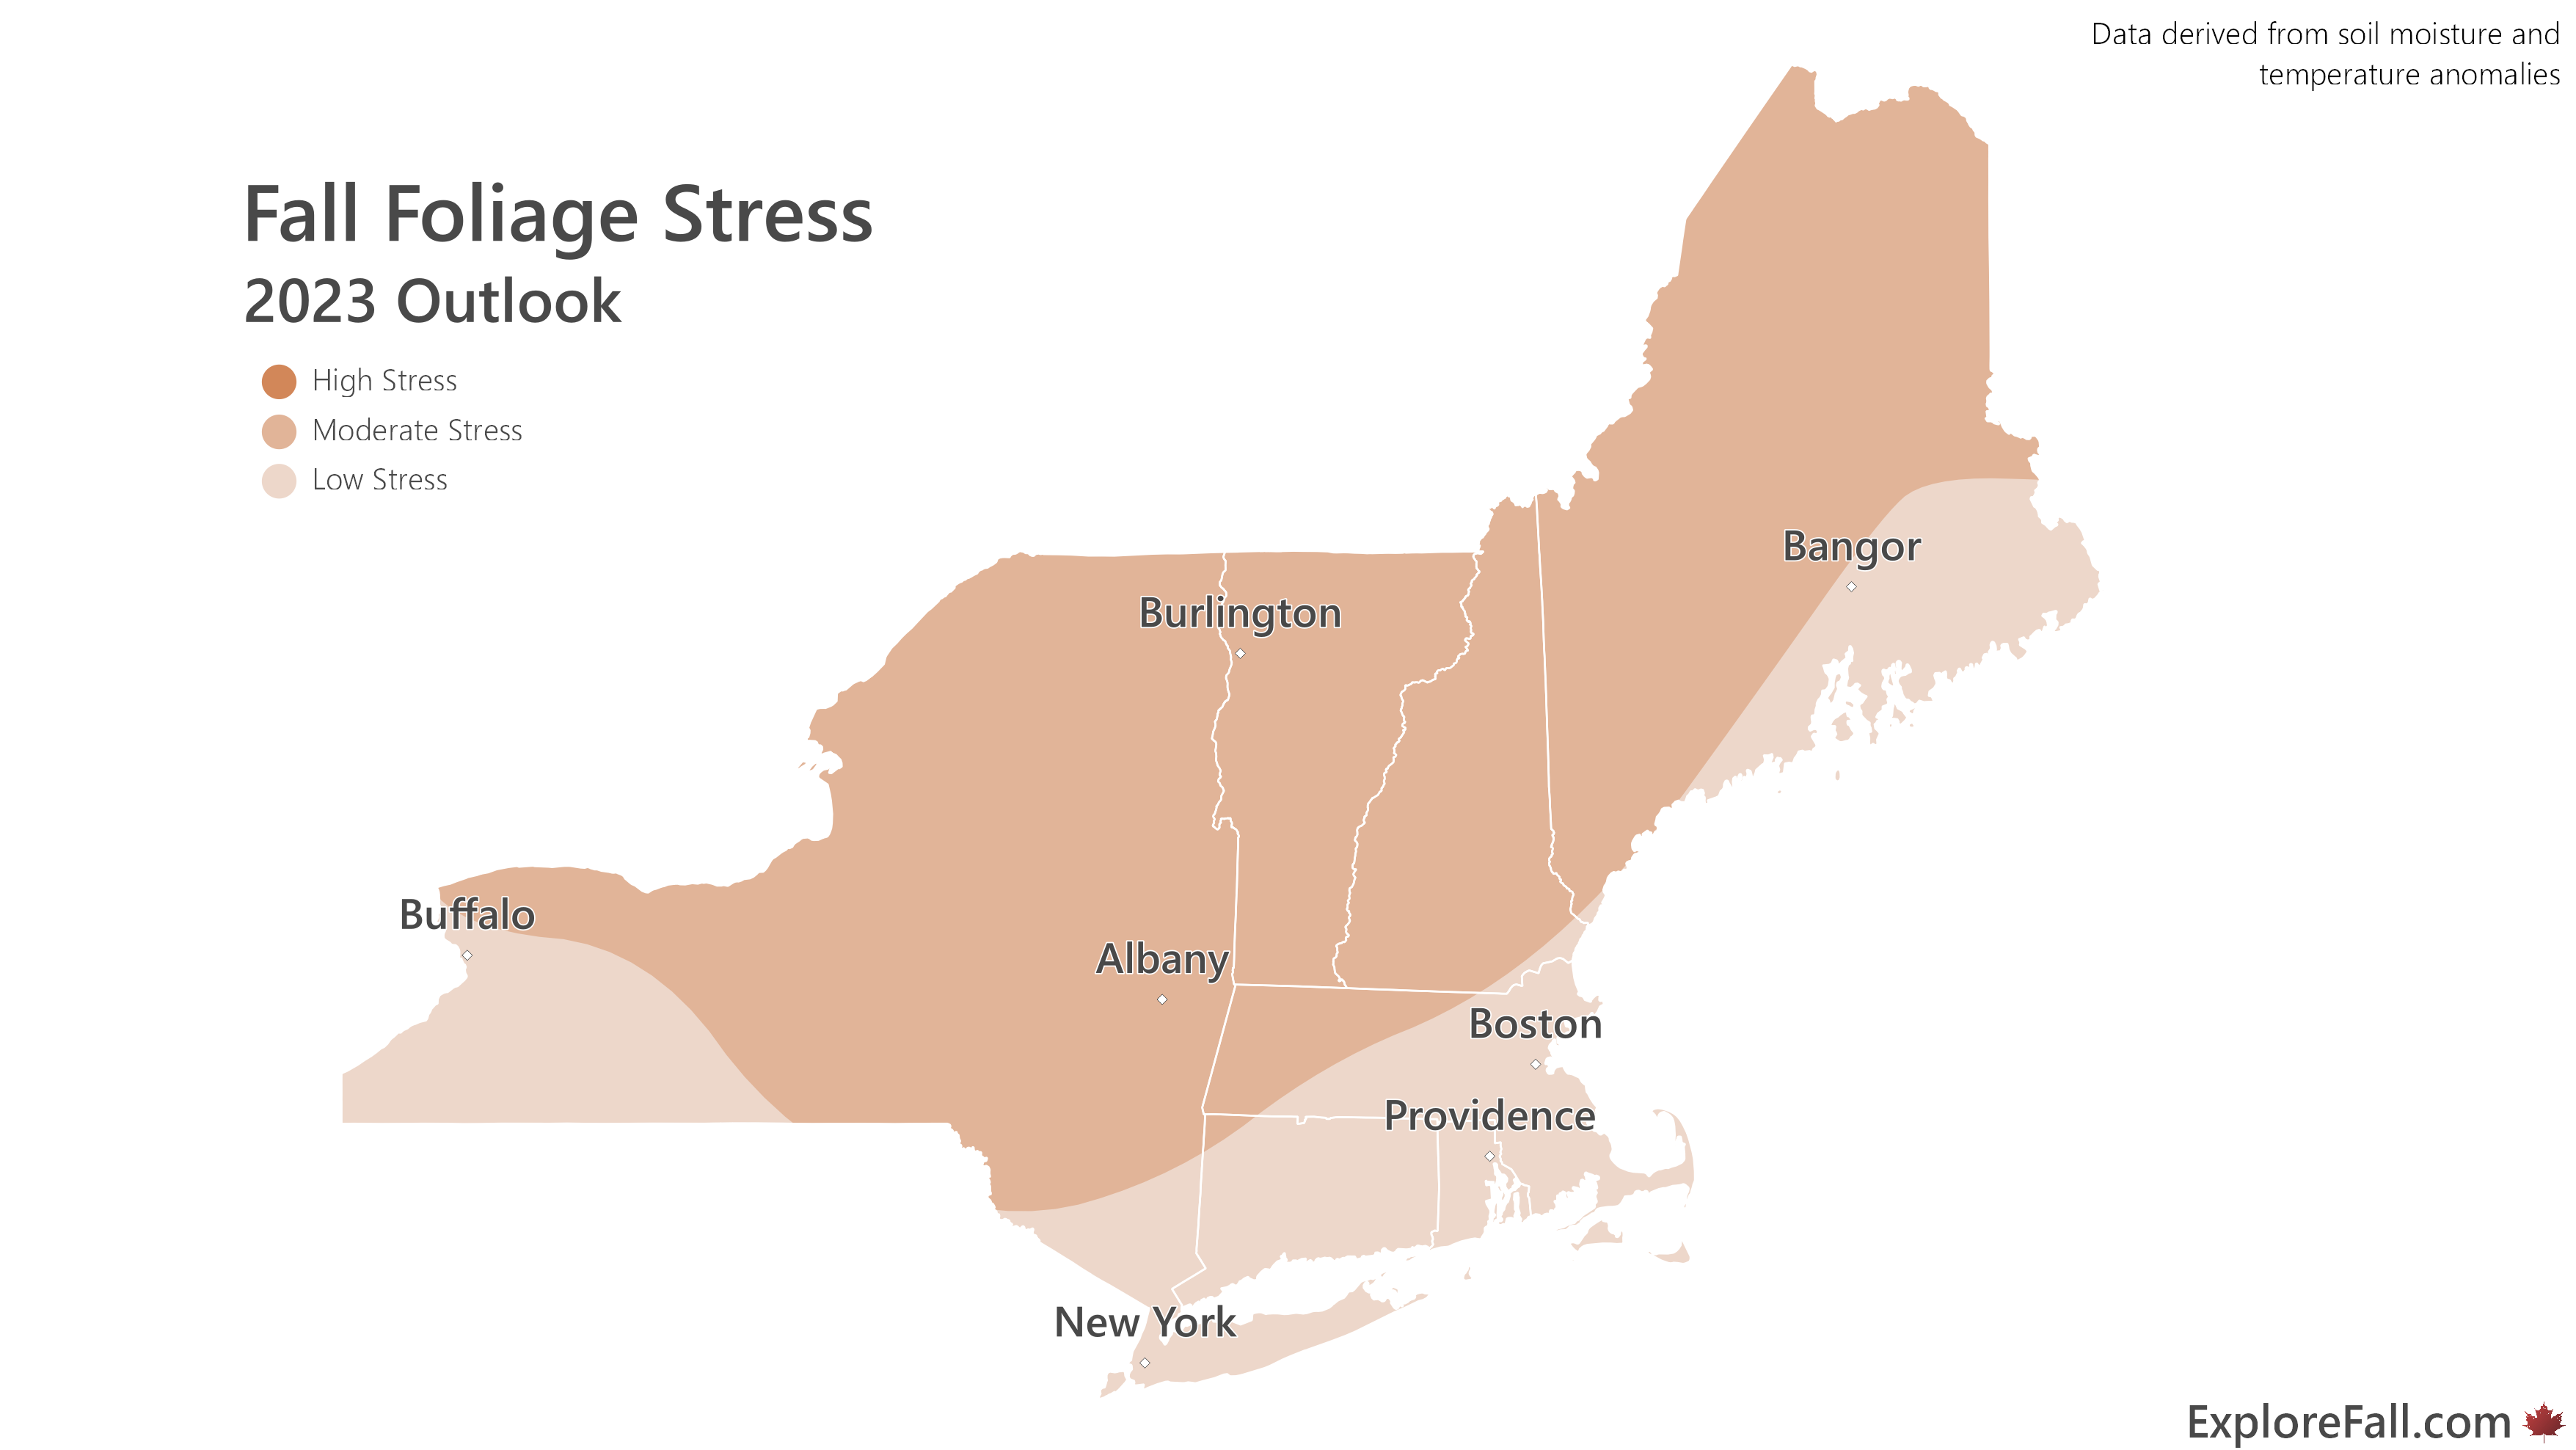 Fall foliage stress in the Northeast is low to moderate in 2023.